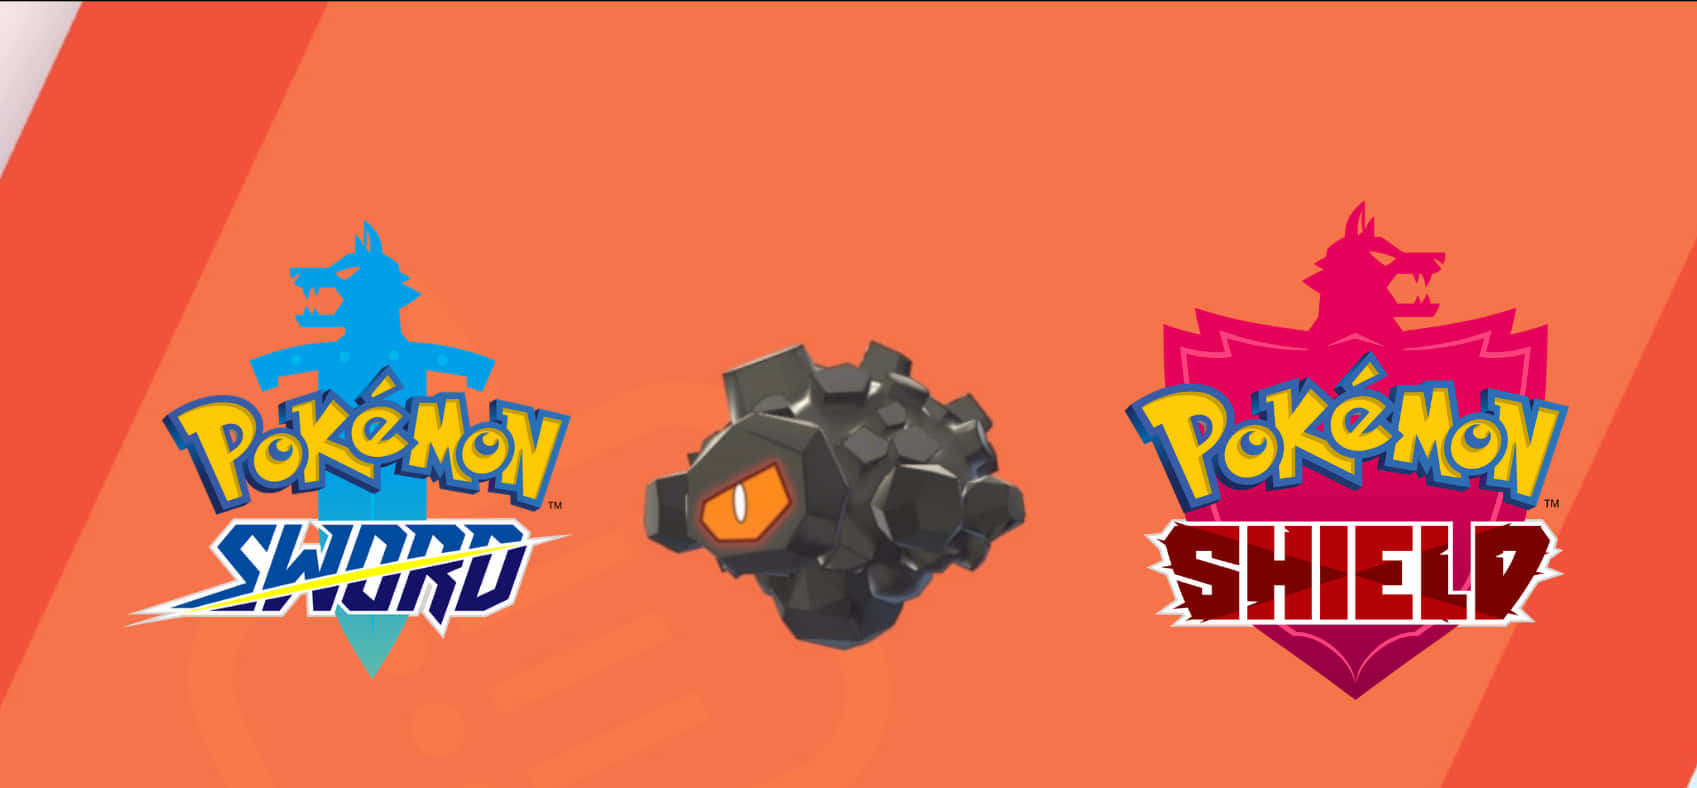 Rolycoly With Pokémon Sword And Shield Logos Wallpaper